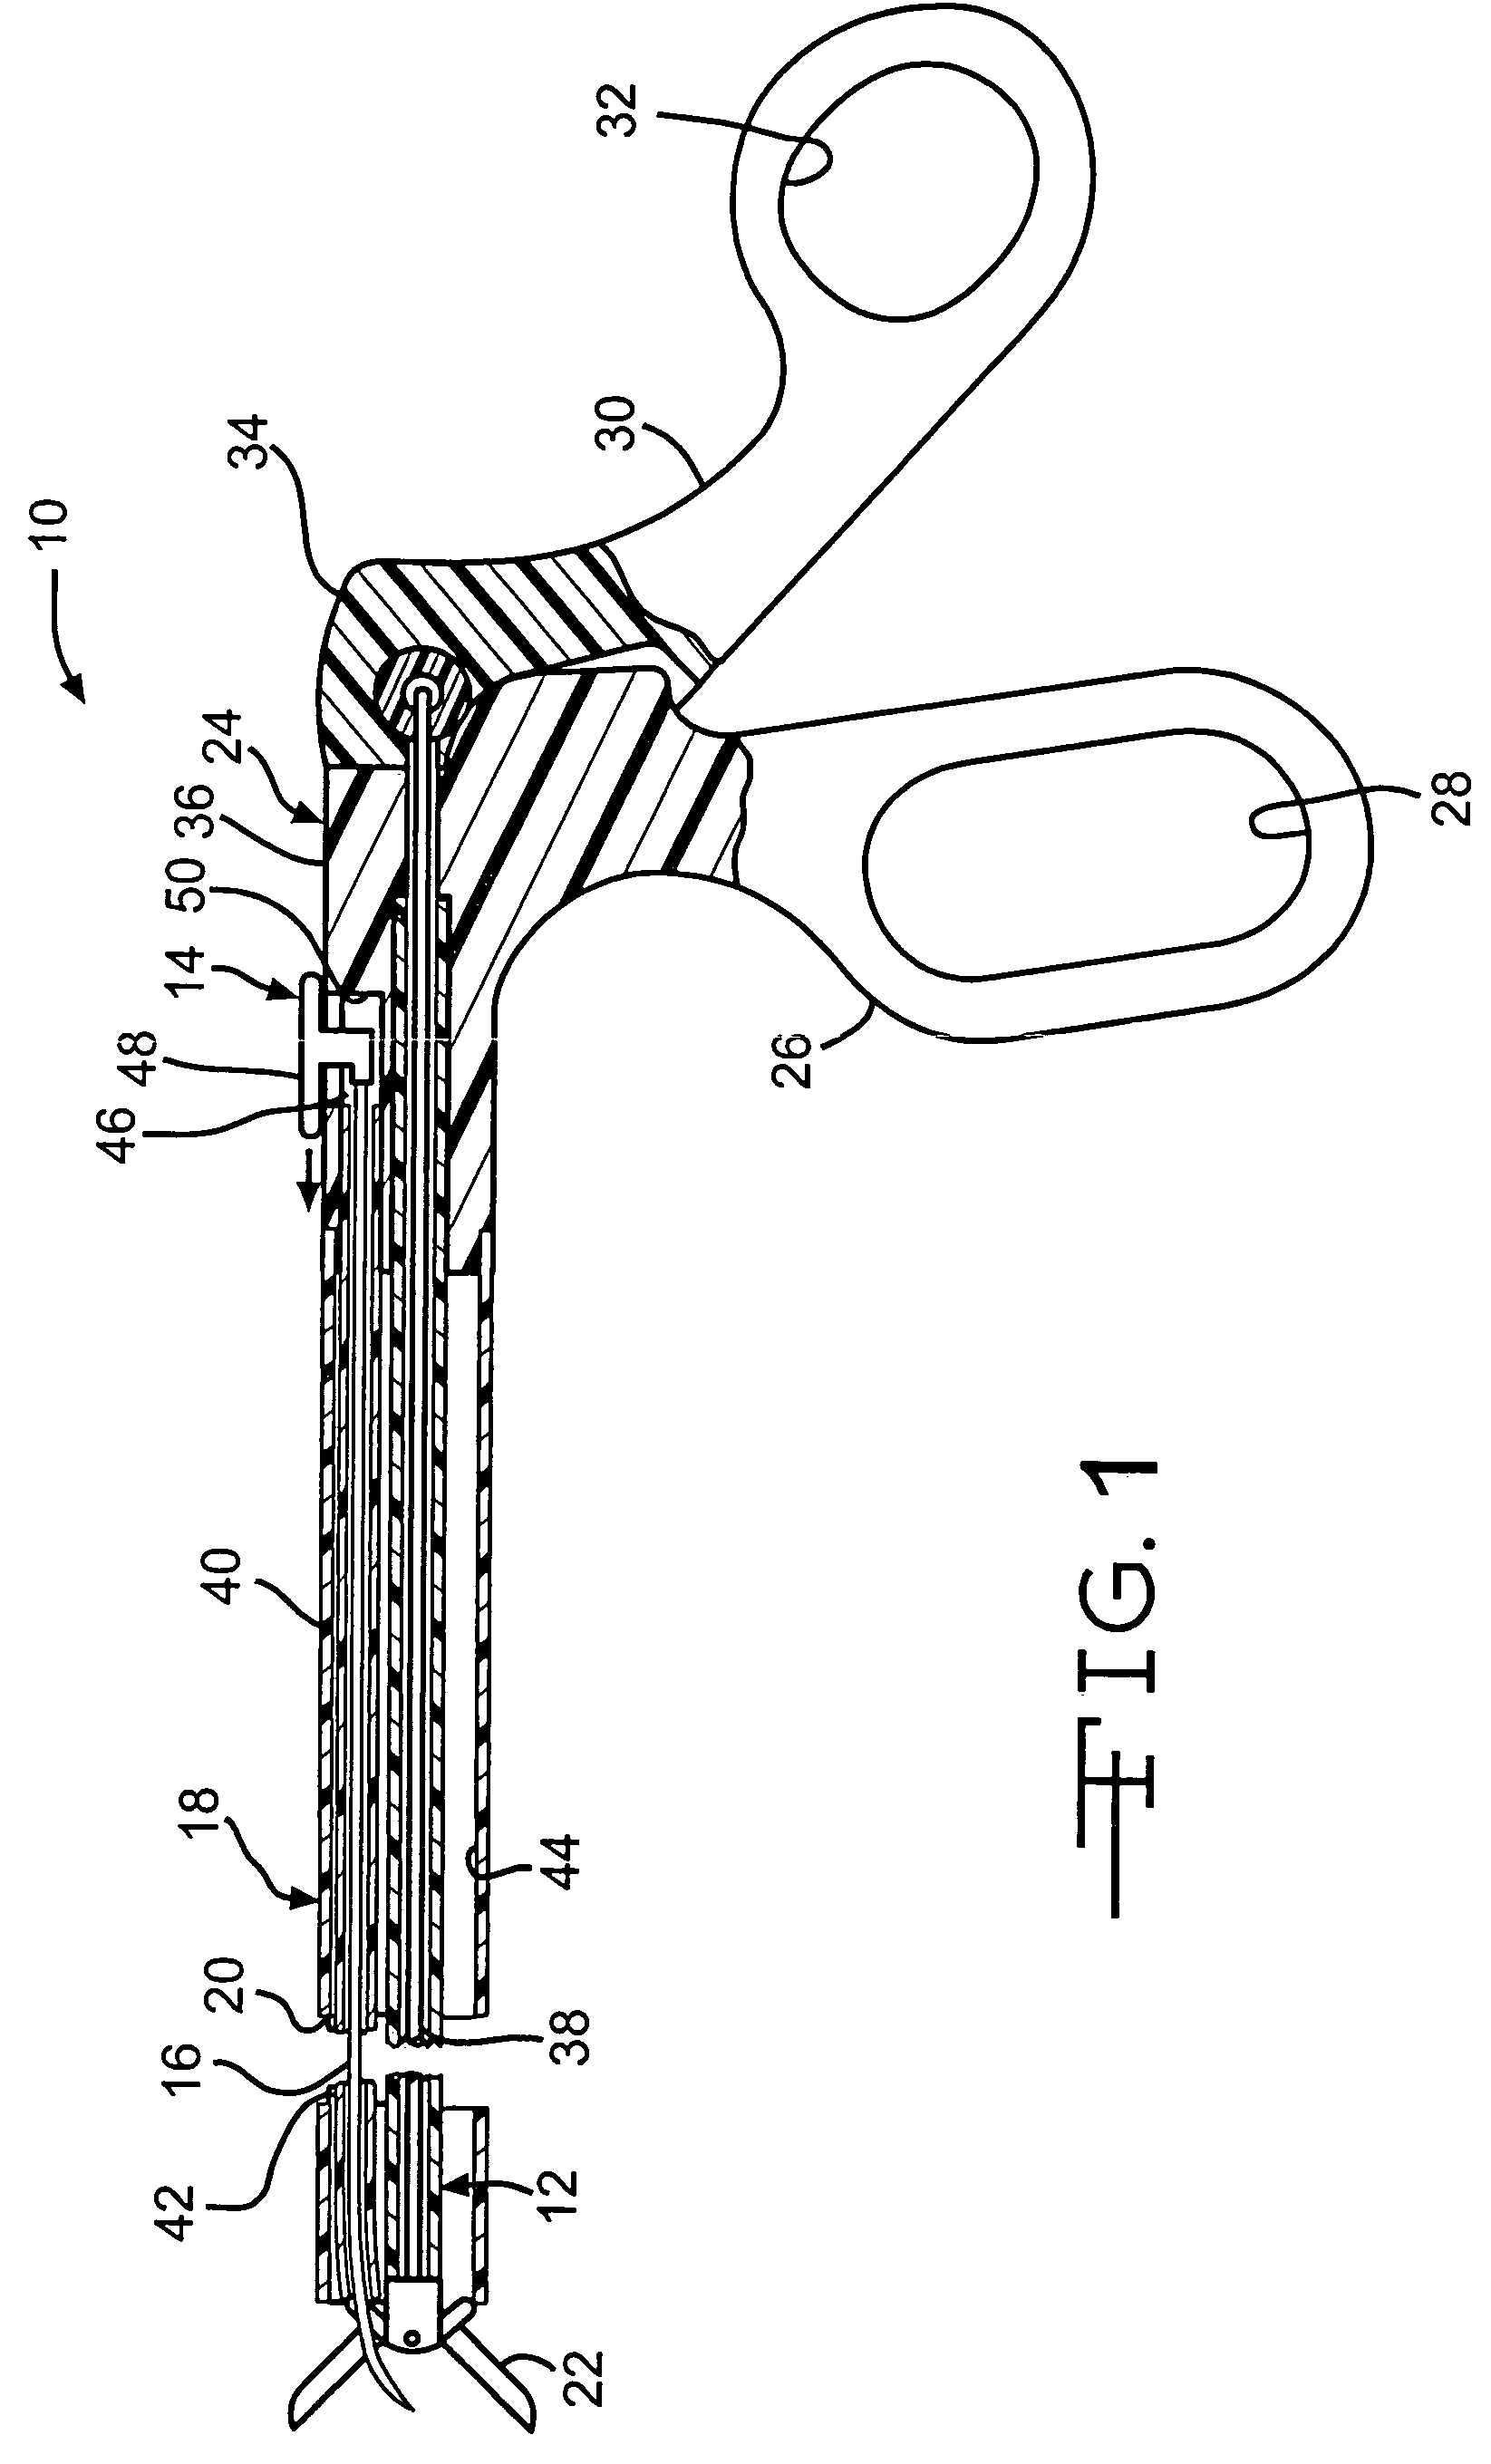 Device and method for intralumenal anastomosis